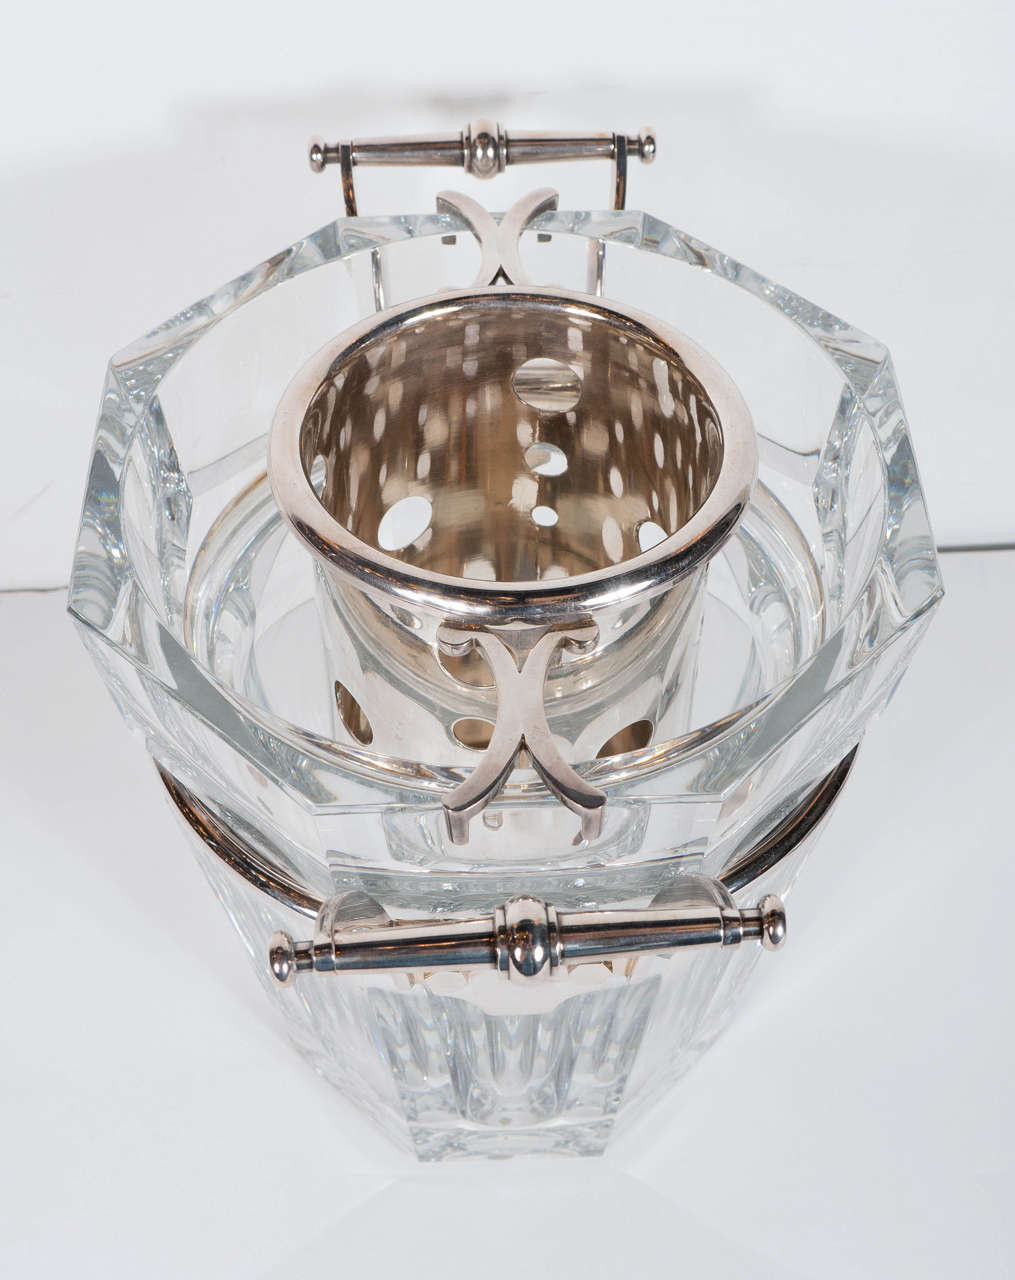 20th Century The 'Moulin Rouge' Champagne Cooler signed by Baccarat in Hand-Blown Crystal